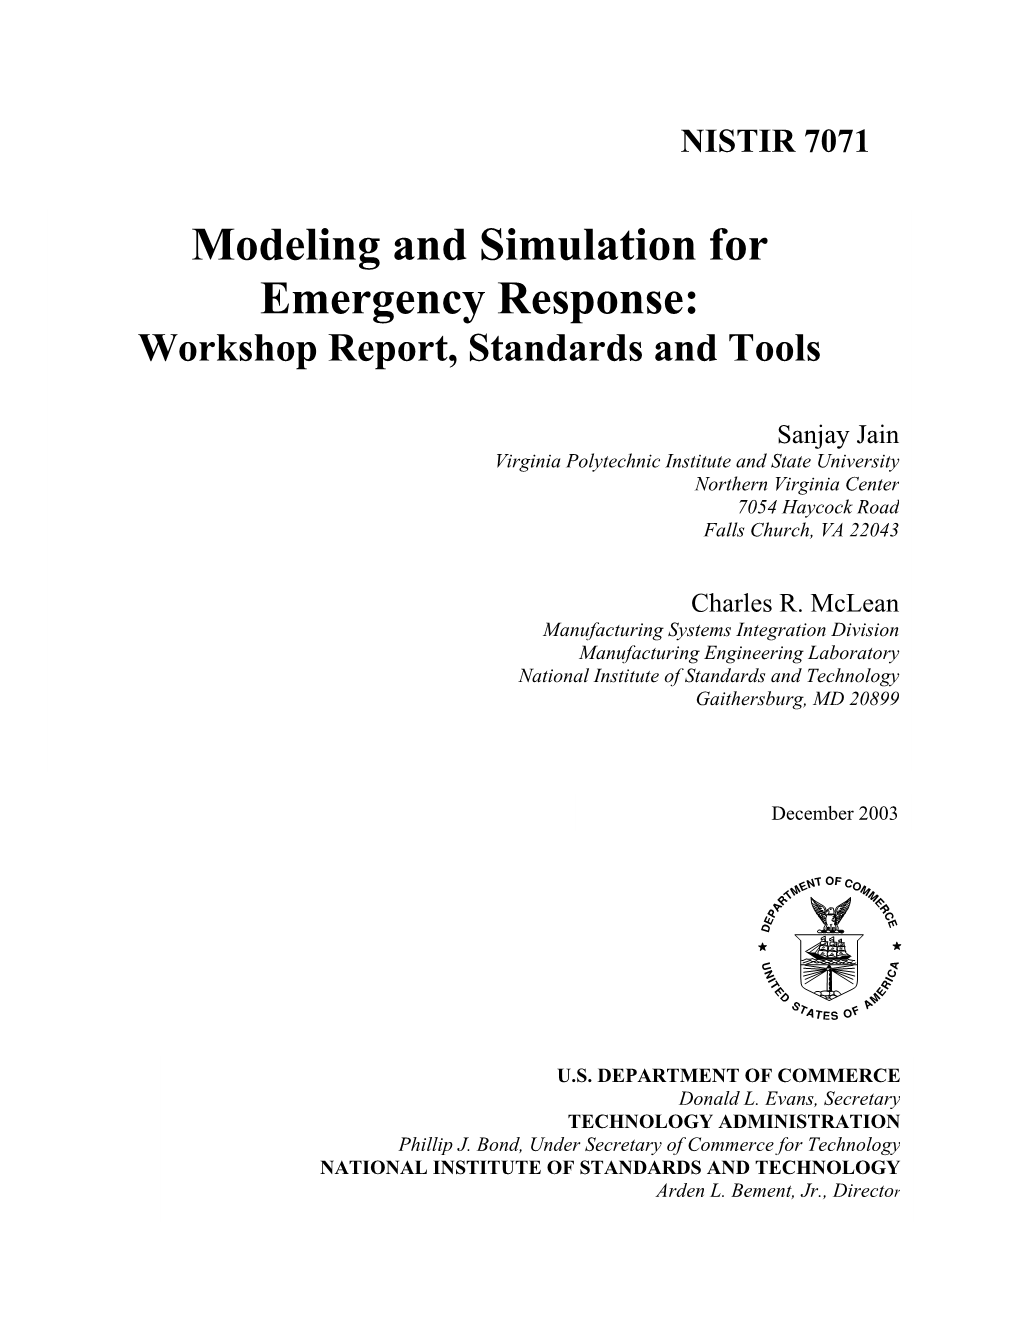 Summary of Workshop on Modeling and Simulation for Emergency